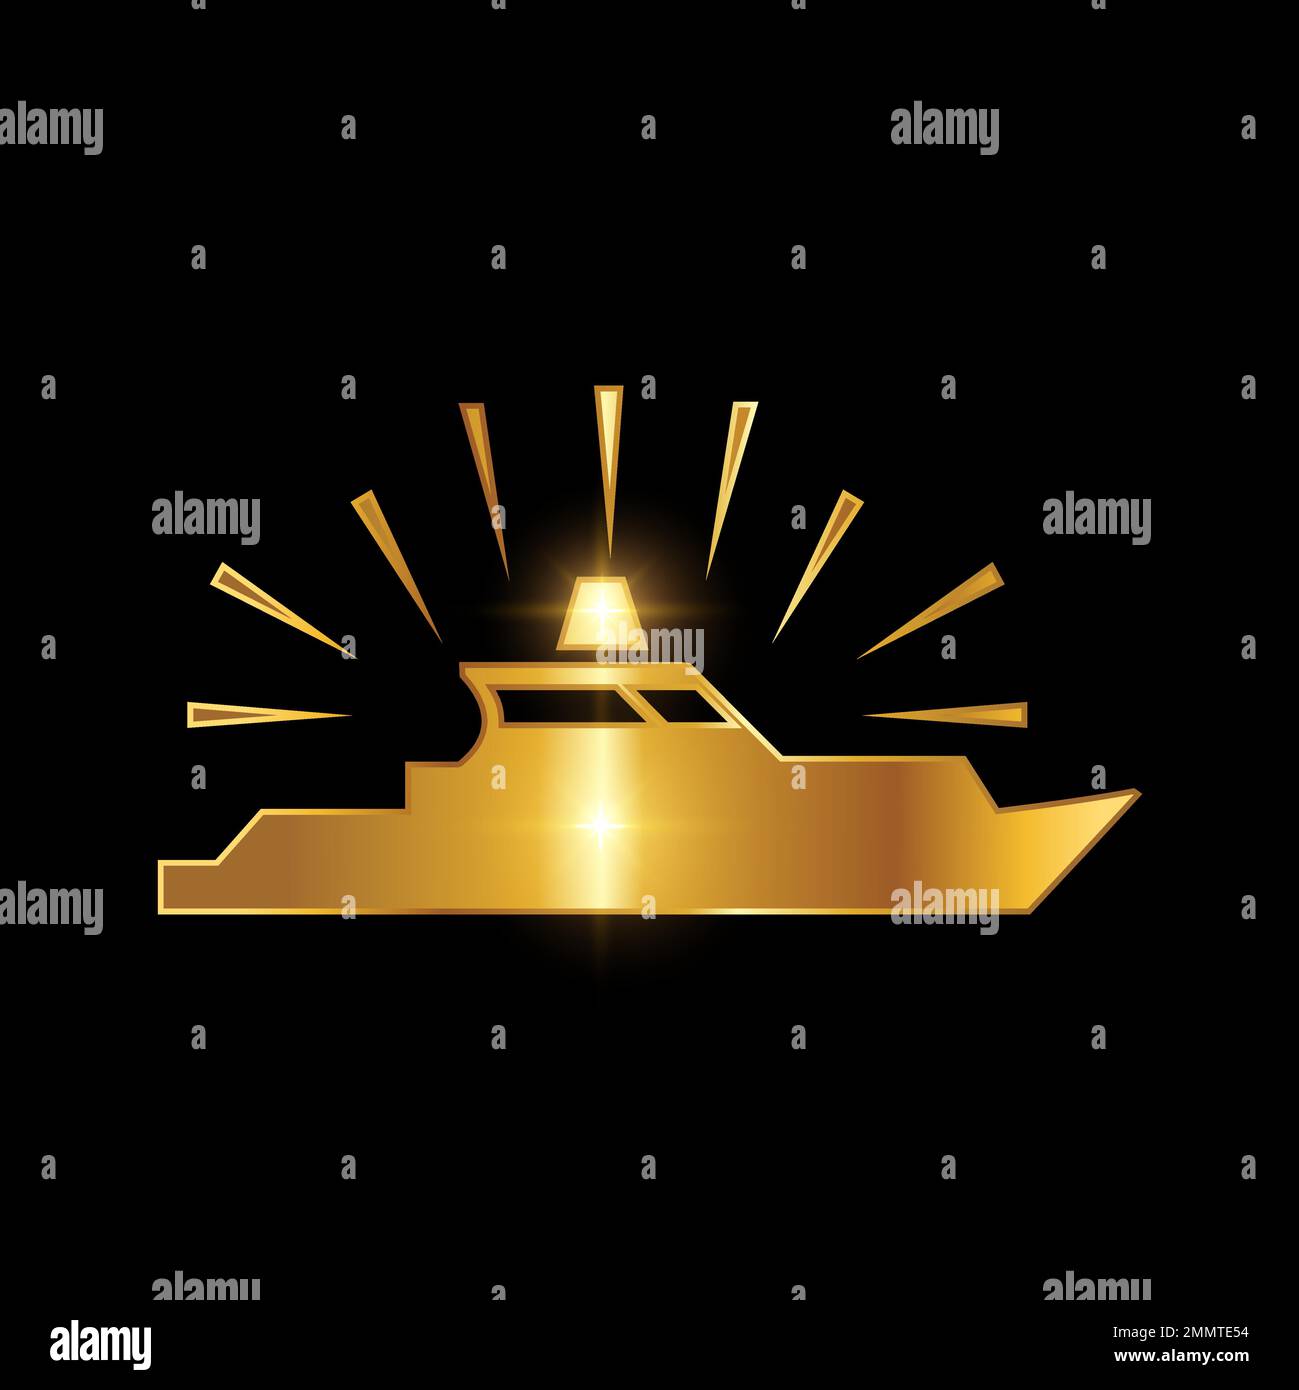 Golden Police Boat icon Vector Sign in black background with gold shine effect Stock Vector